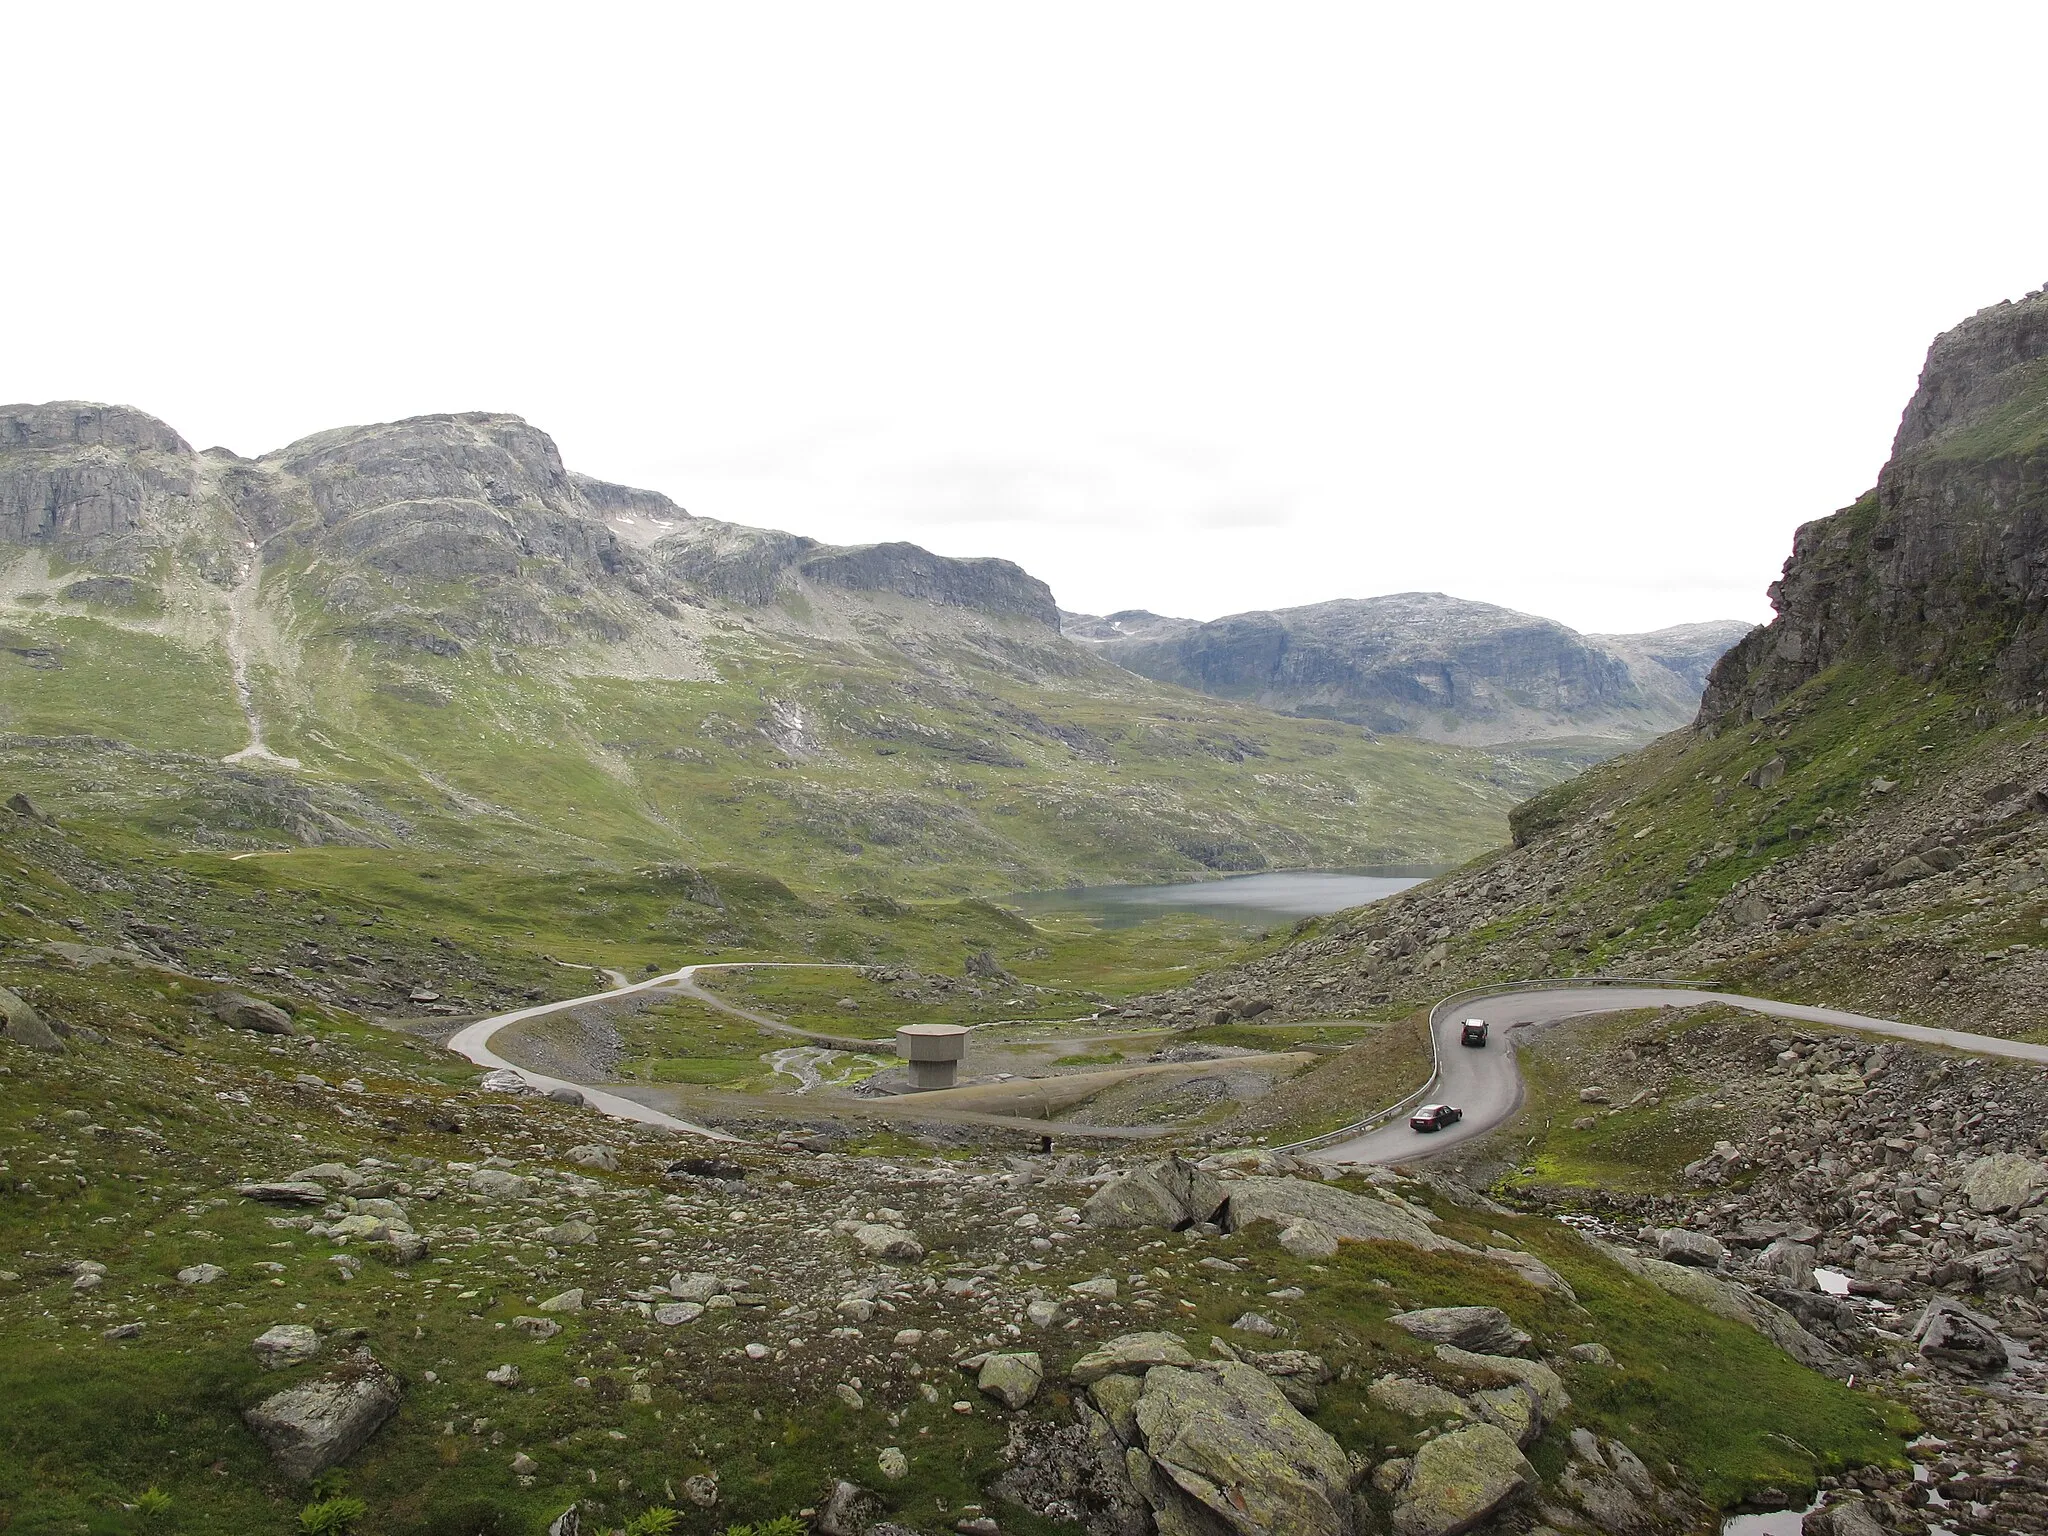 Photo showing: From the "Dyrskar" pass on the Haukeli mountain plateau in Norway. View looking east from the oldest road, showin a newer road snaking up the mountain, while the concrete structure in the middle is todays E134 road going in a tunnel under the area.